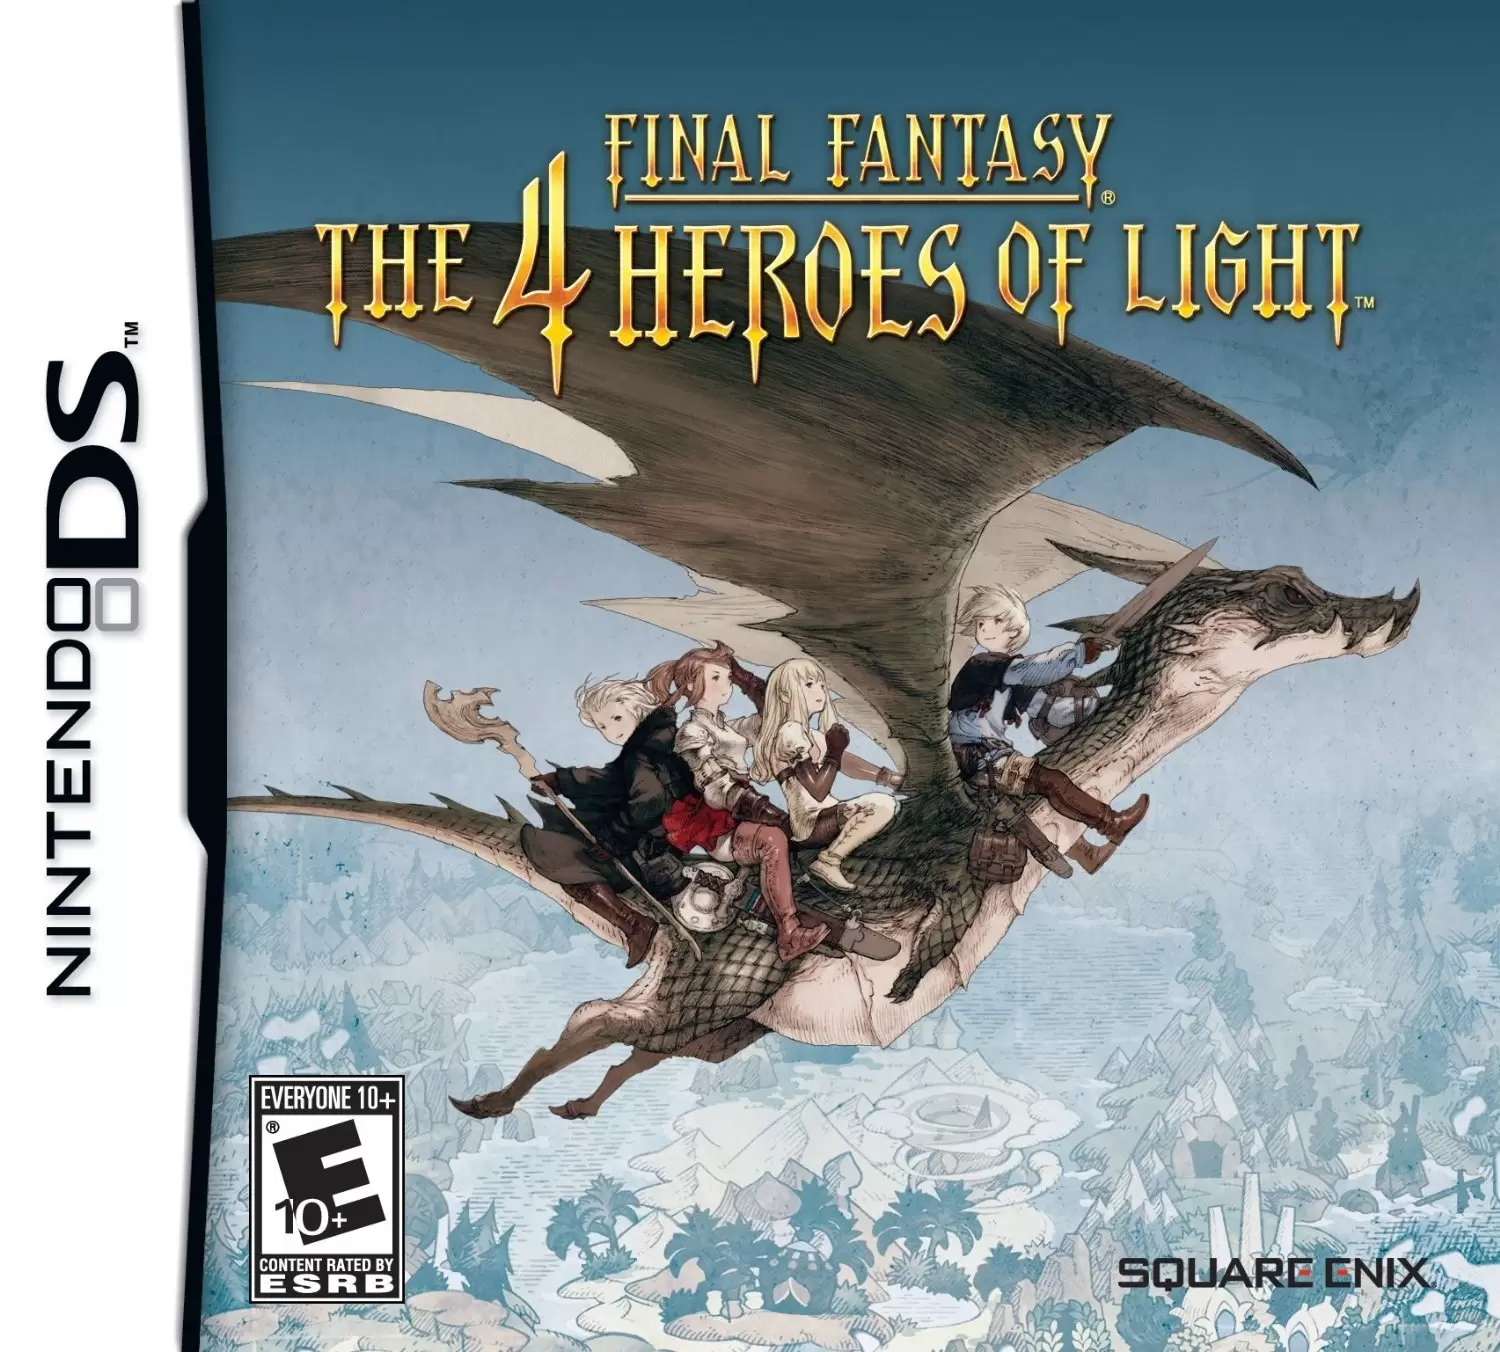 Nintendo DS Games - Final Fantasy: The 4 Heroes of Light